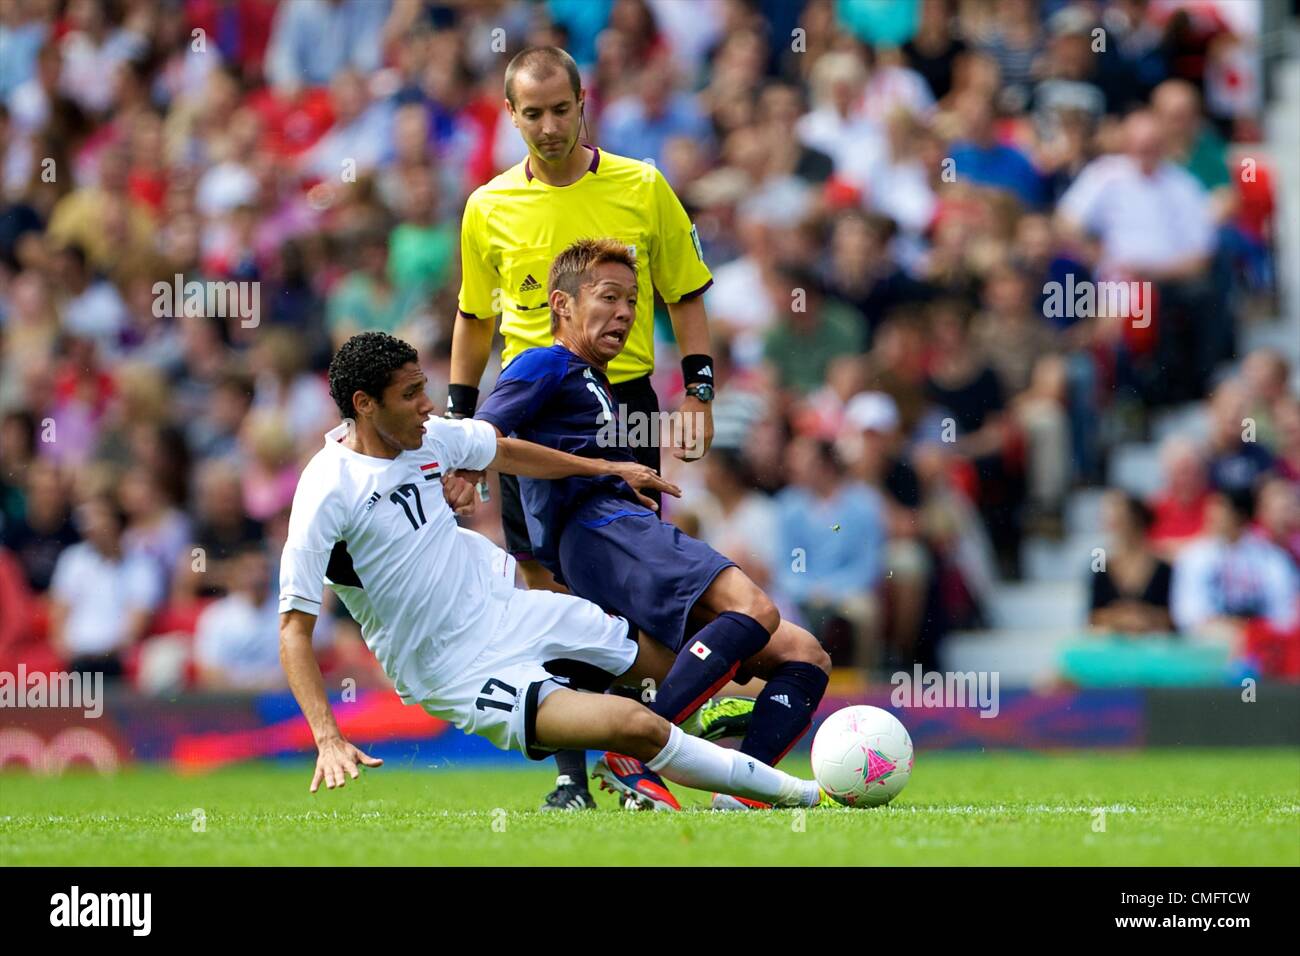 UK. 04.08.2012 Manchester, England. Japan midfielder Hiroshi Kiyotake and Egypt midfielder Mohamed El-Nenny in action during the quarter final match between Japan and Egypt at Old Trafford. Japan won the game by a score of 3-0 to proceed to the tournament semi-finals. Stock Photo